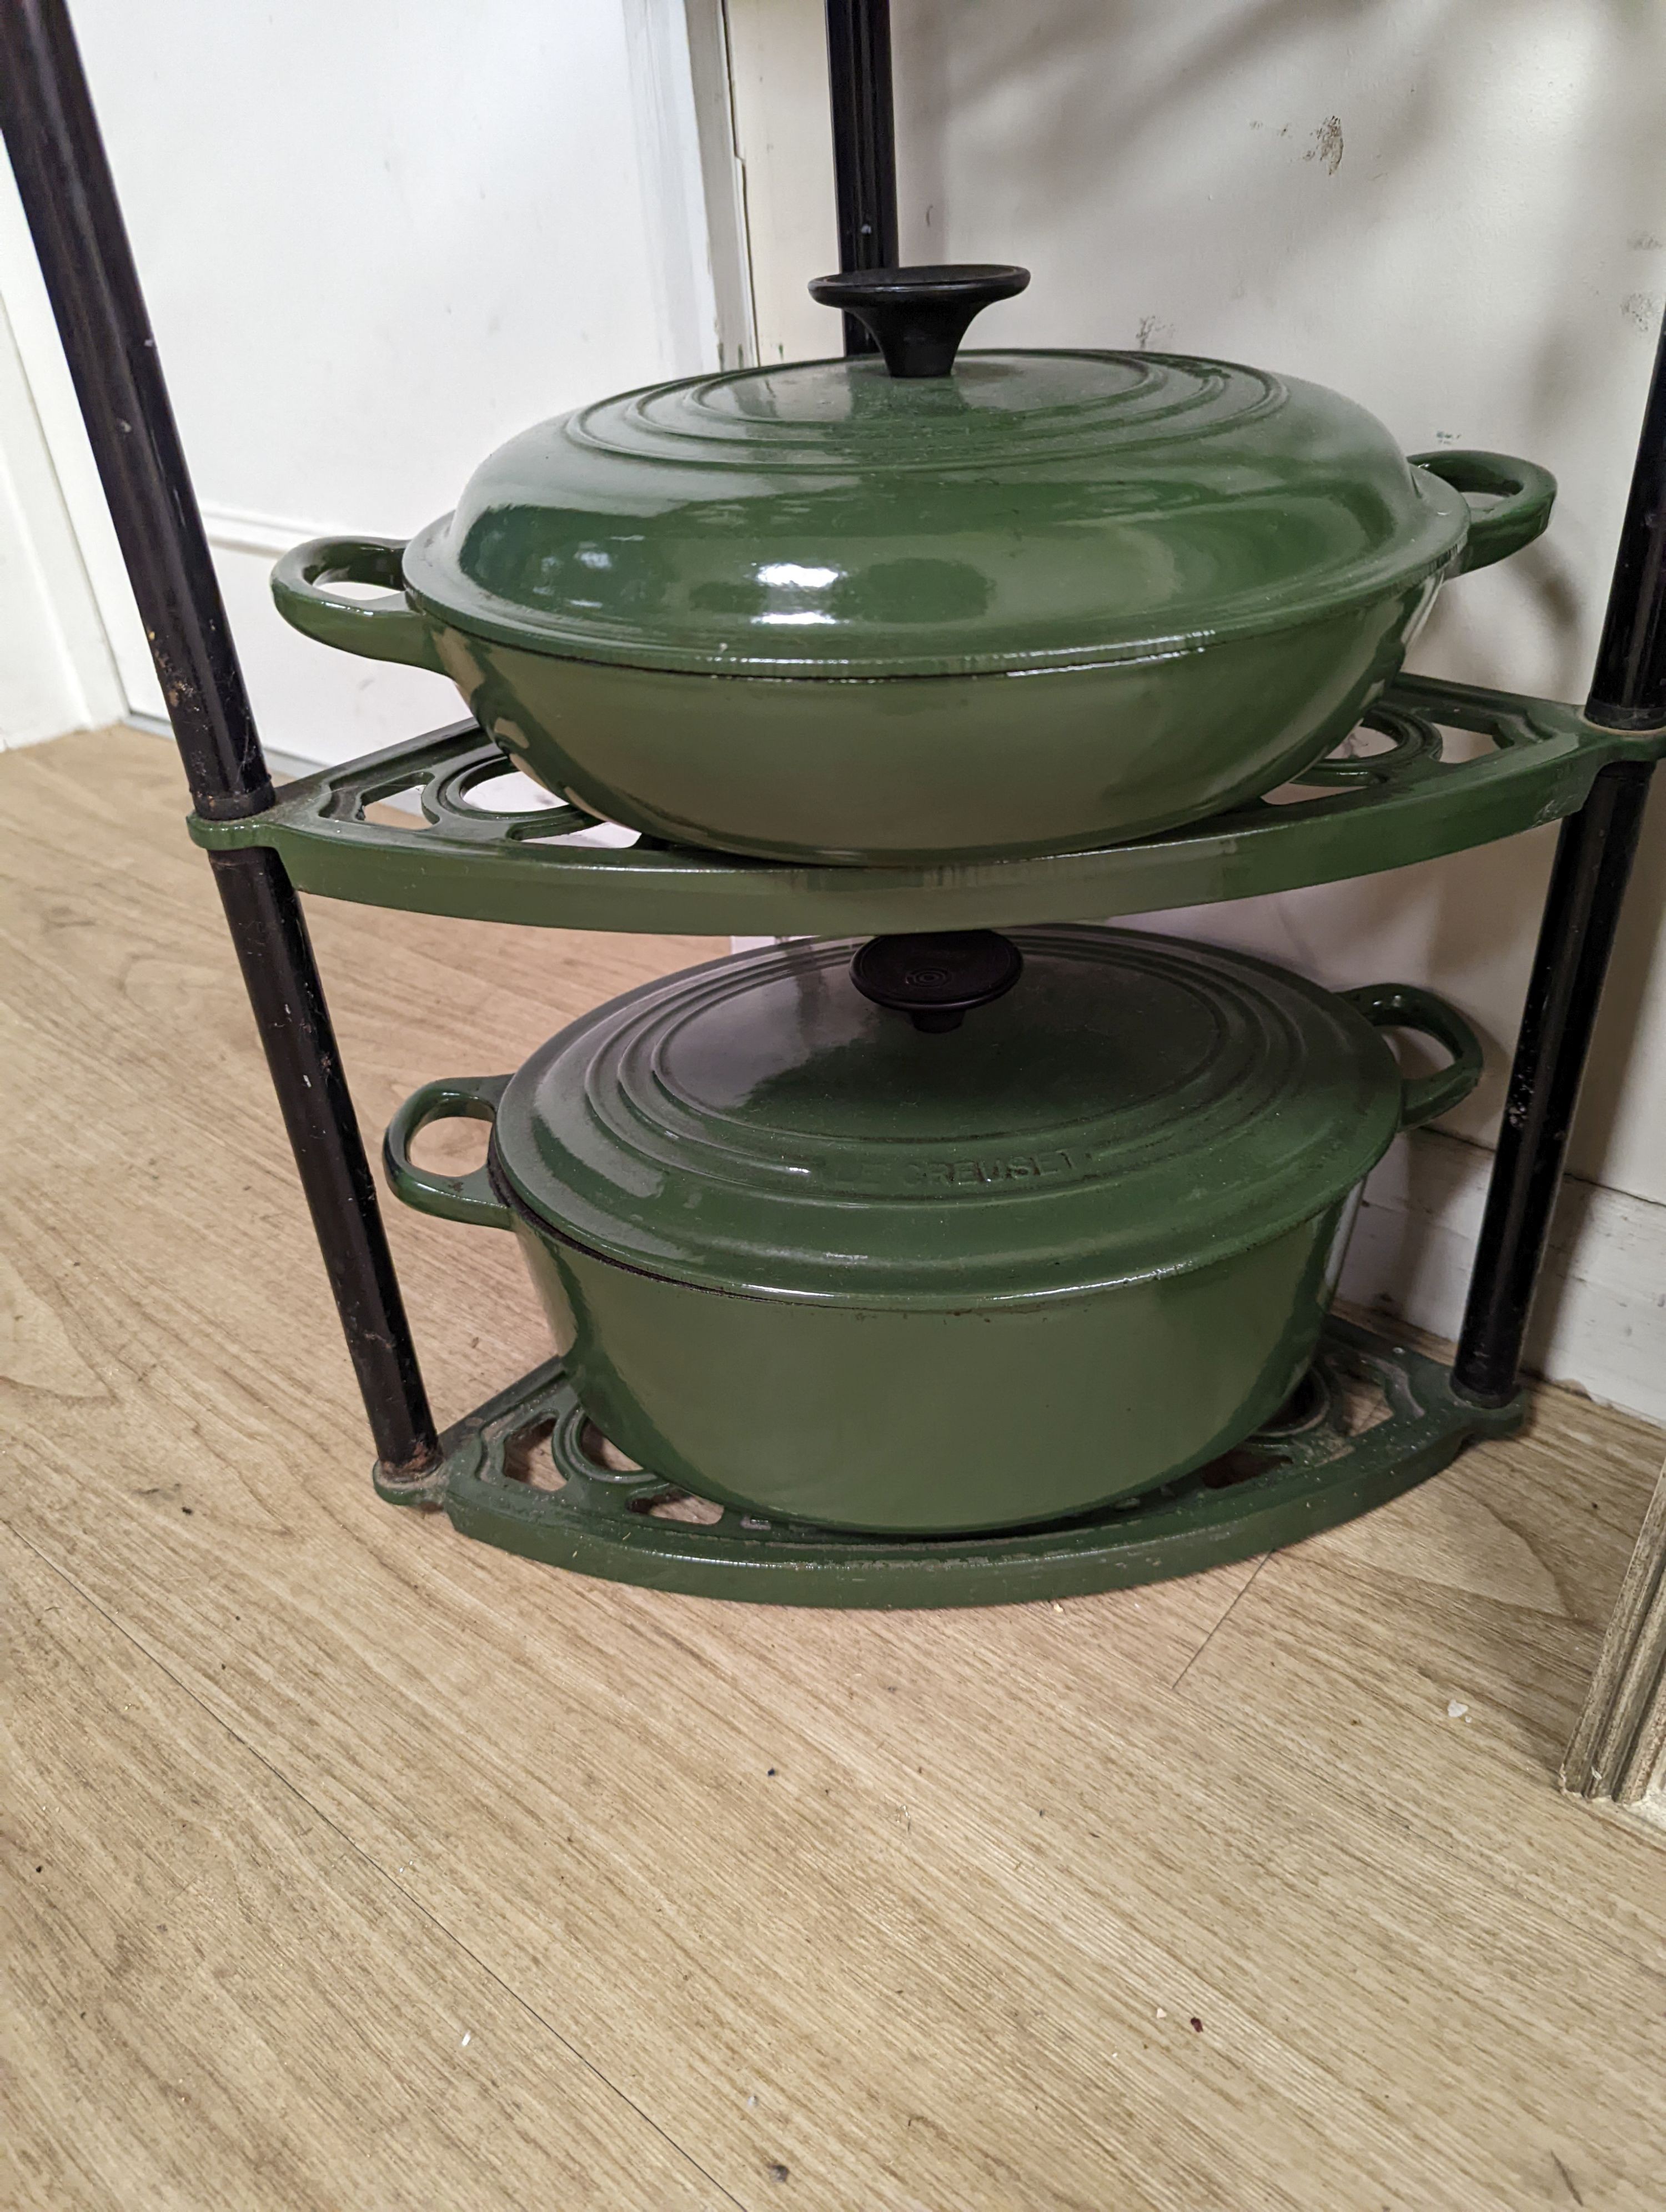 A green enamel Le Cruset pot stand, three pans and a bottle rack, stand 90 cms high.